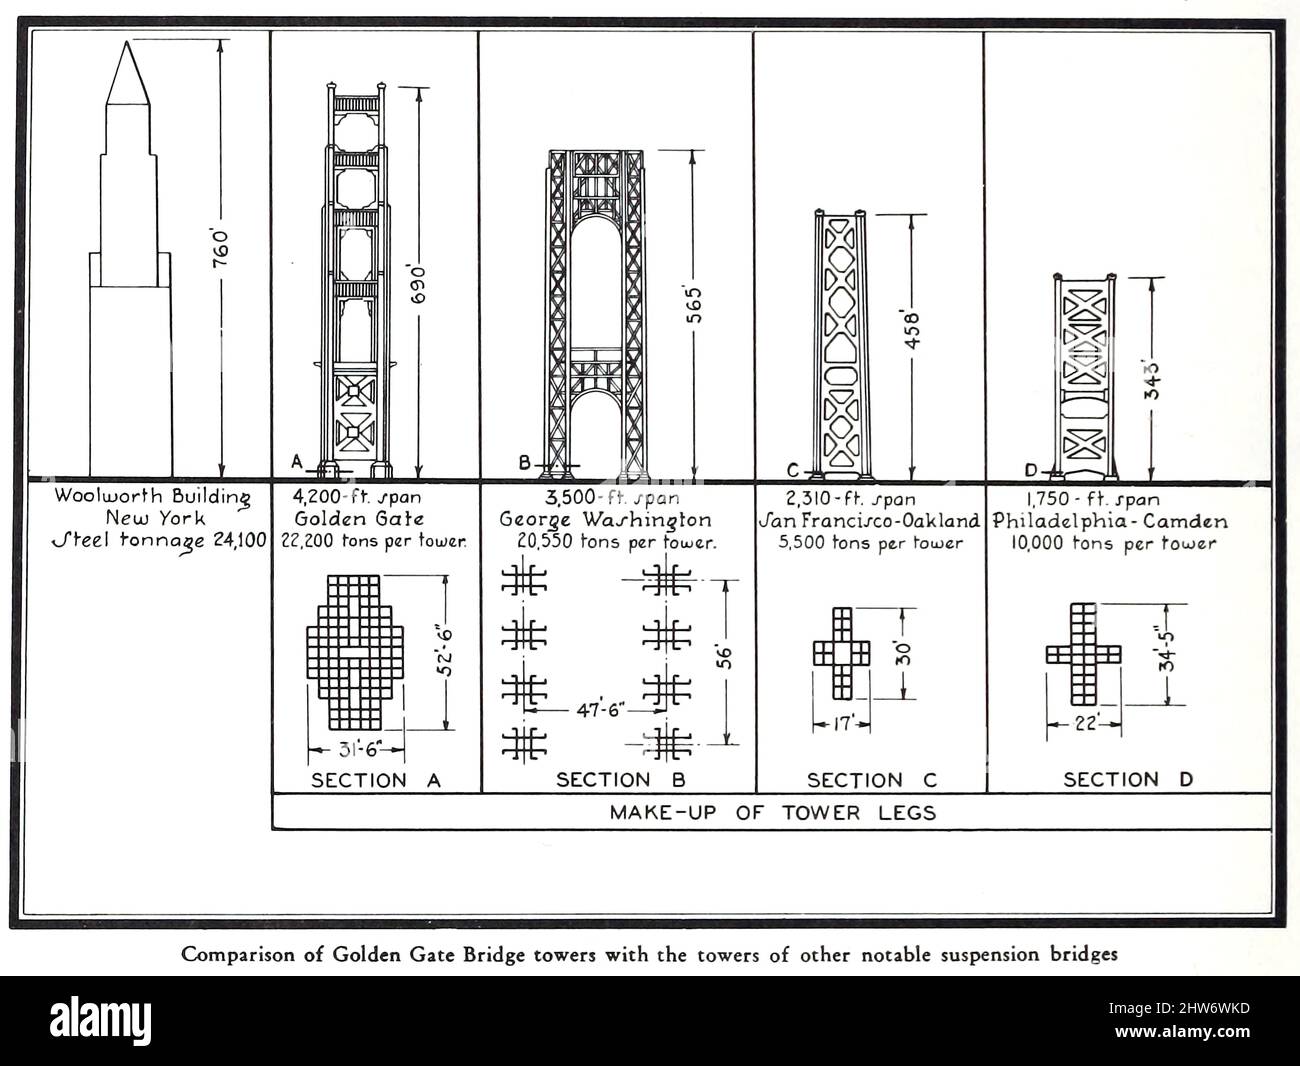 Comparison of Golden Gate Bridge towers to other notable suspension bridges from The Golden Gate Bridge; report of the Chief Engineer to the Board of Directors of the Golden Gate Bridge and Highway District, California, September, 1937 Stock Photo